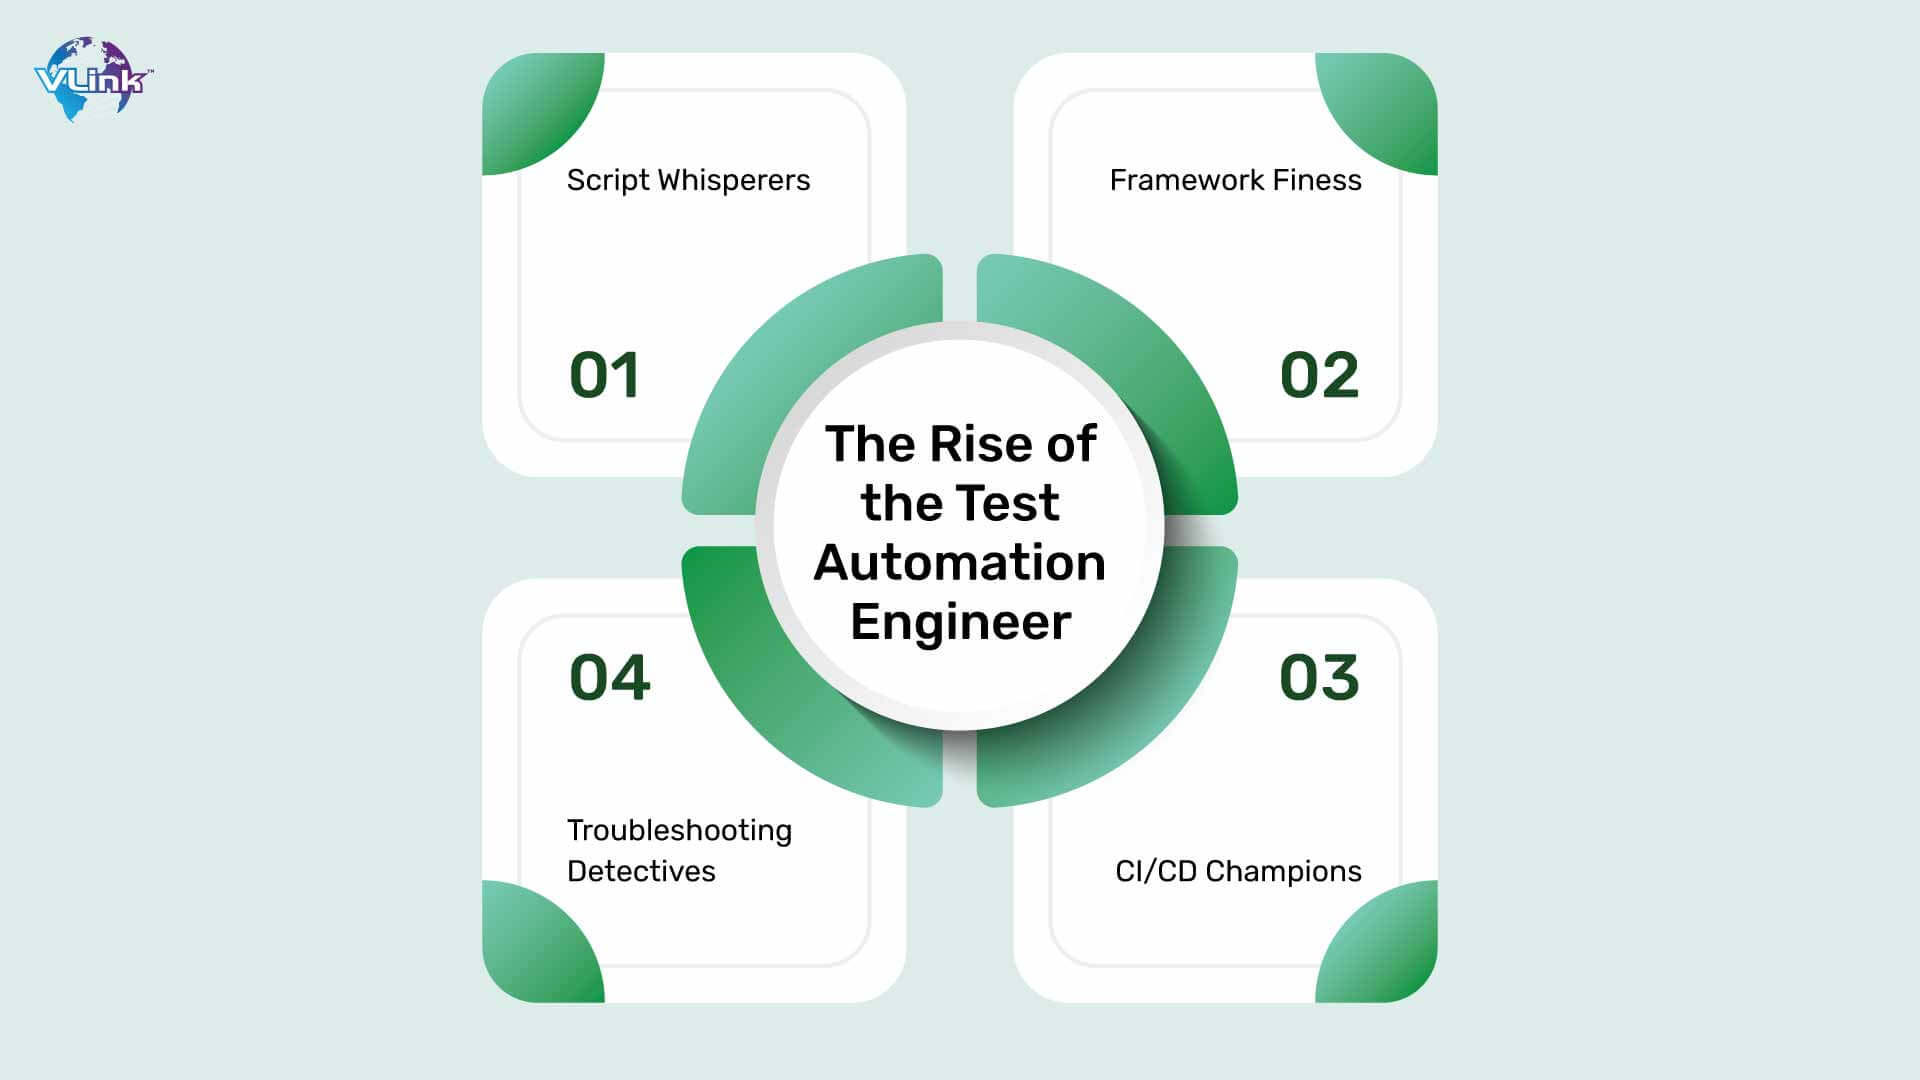 The Rise of the Test Automation Engineer